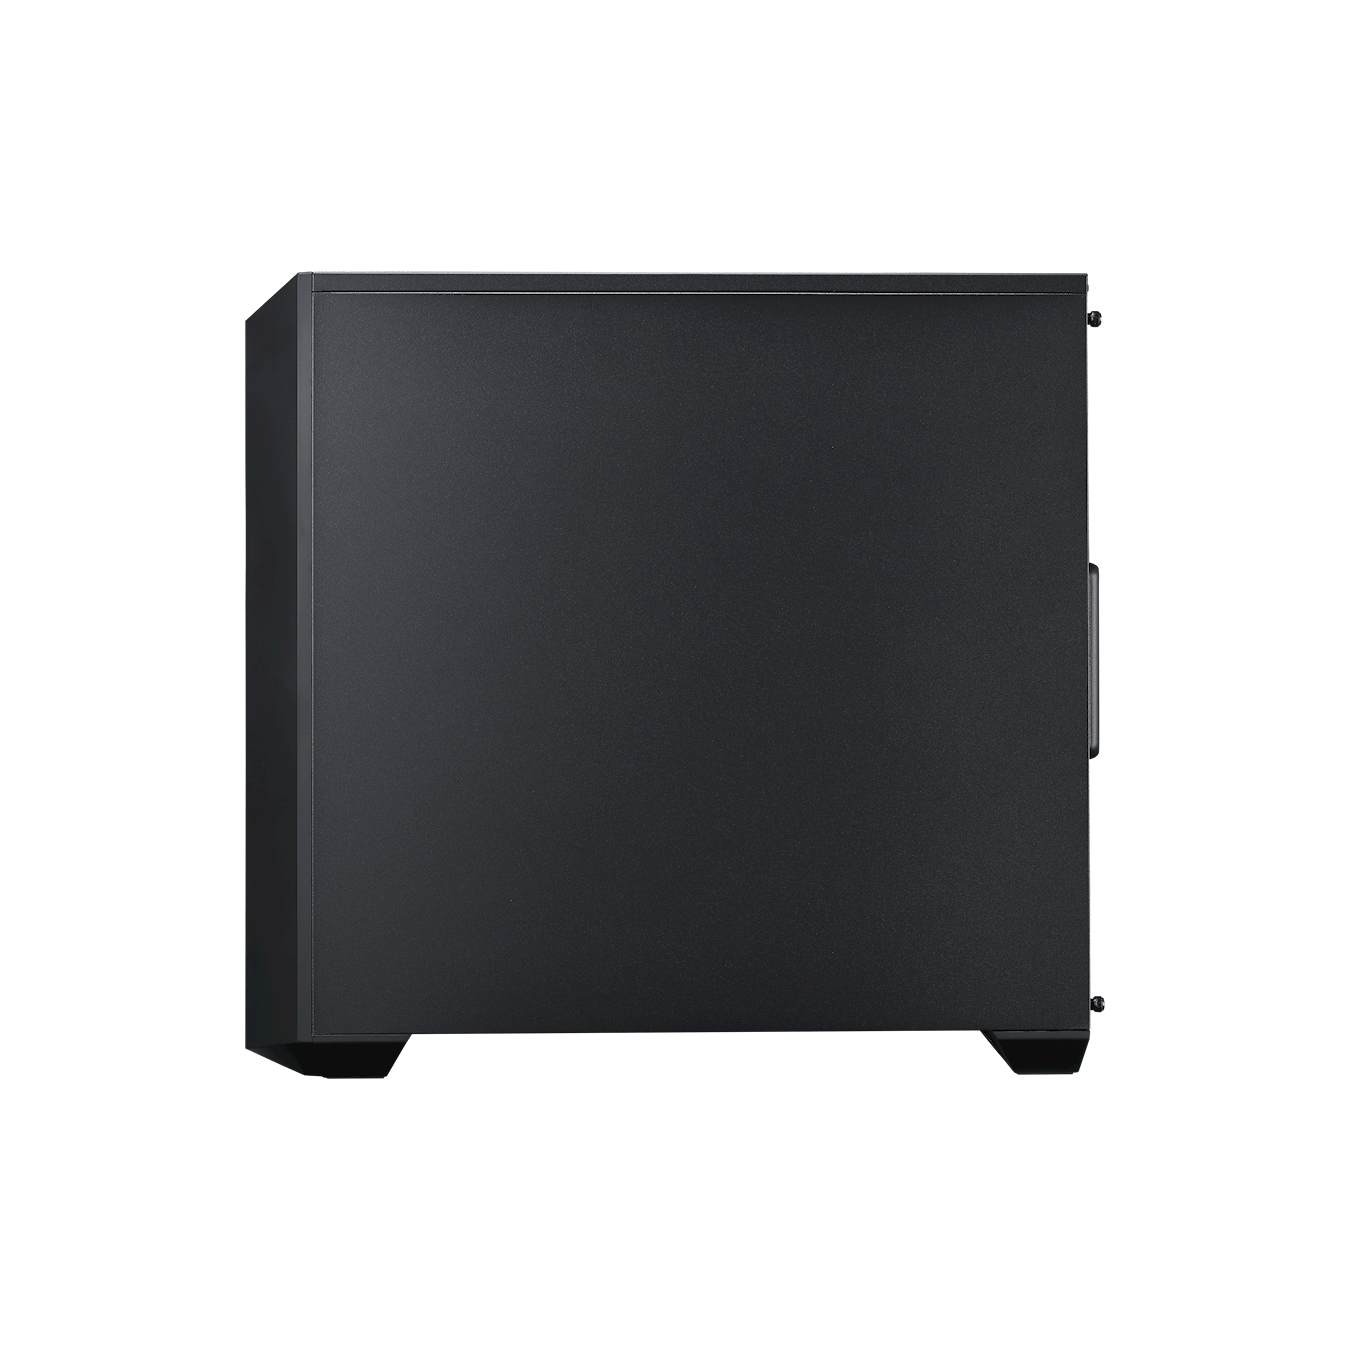 MasterBox 5 - Black with MeshFlow Front Panel